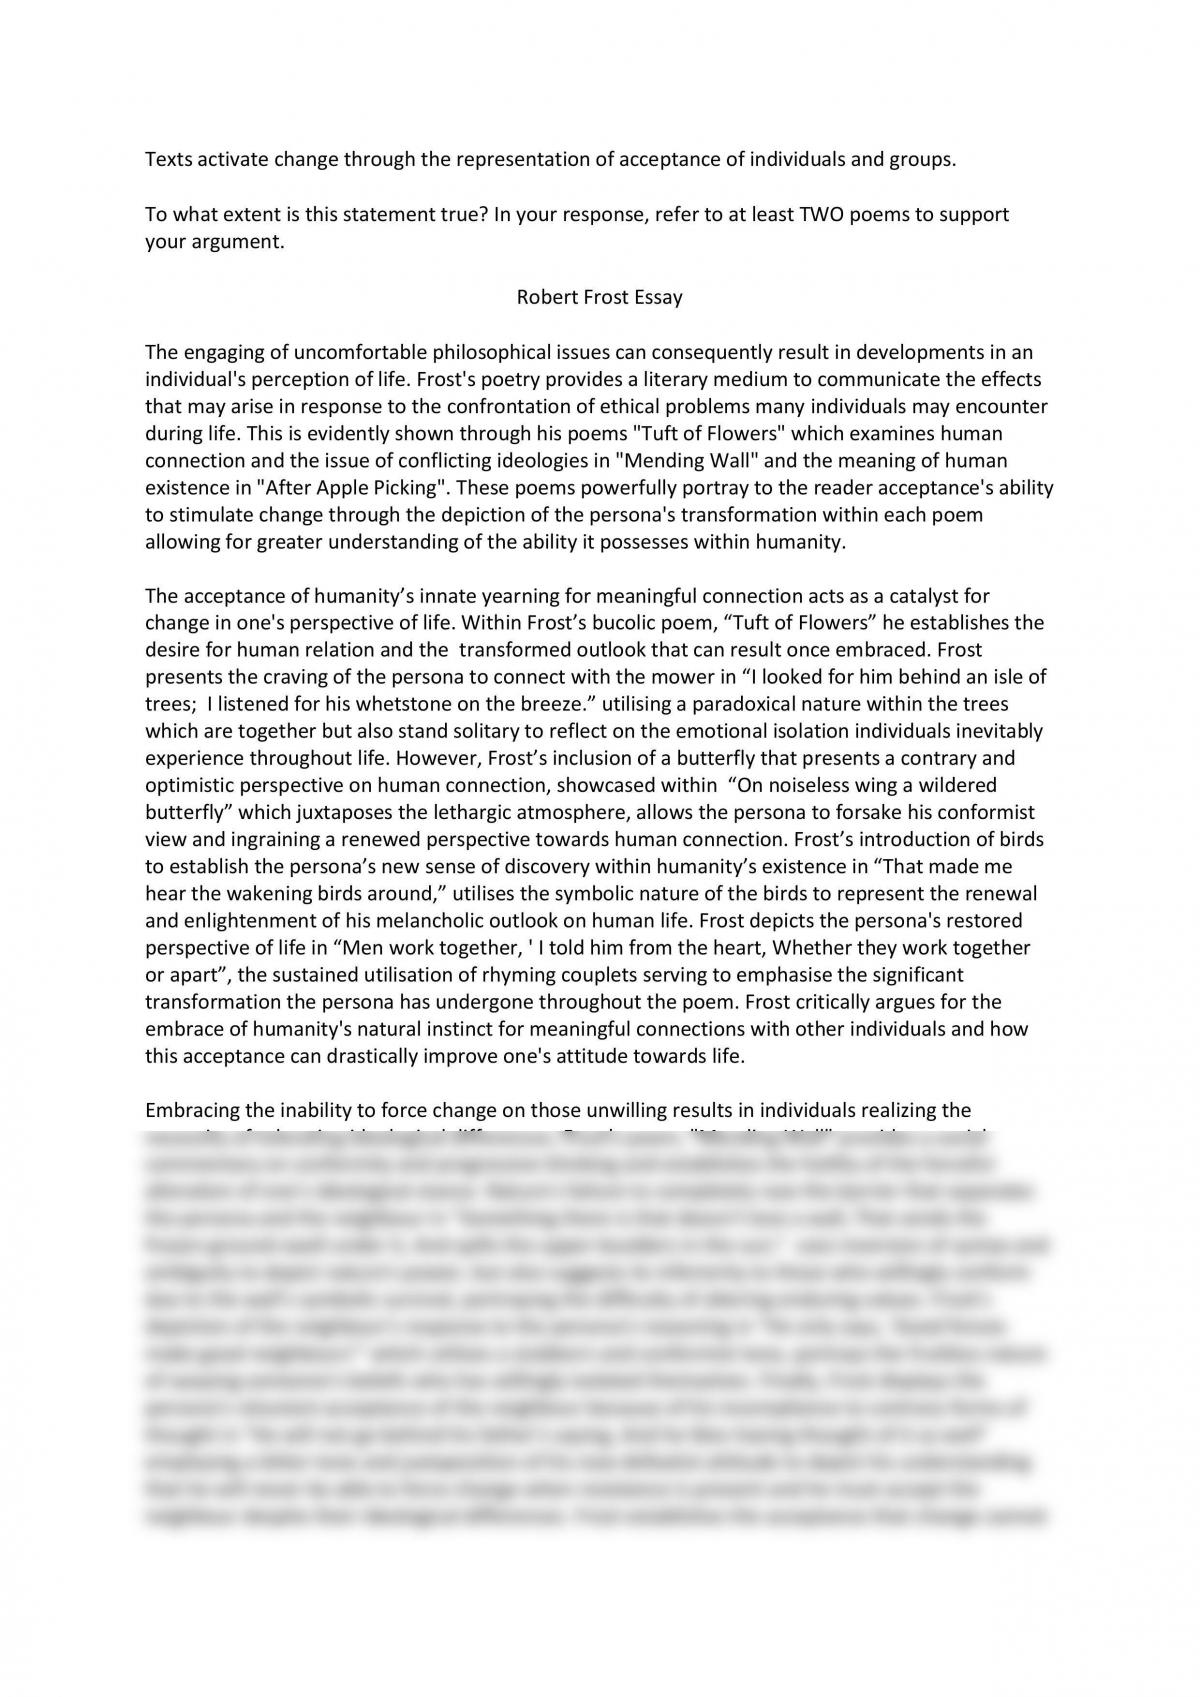 Реферат: Robert Frost Archetypal Analysis Essay Research Paper